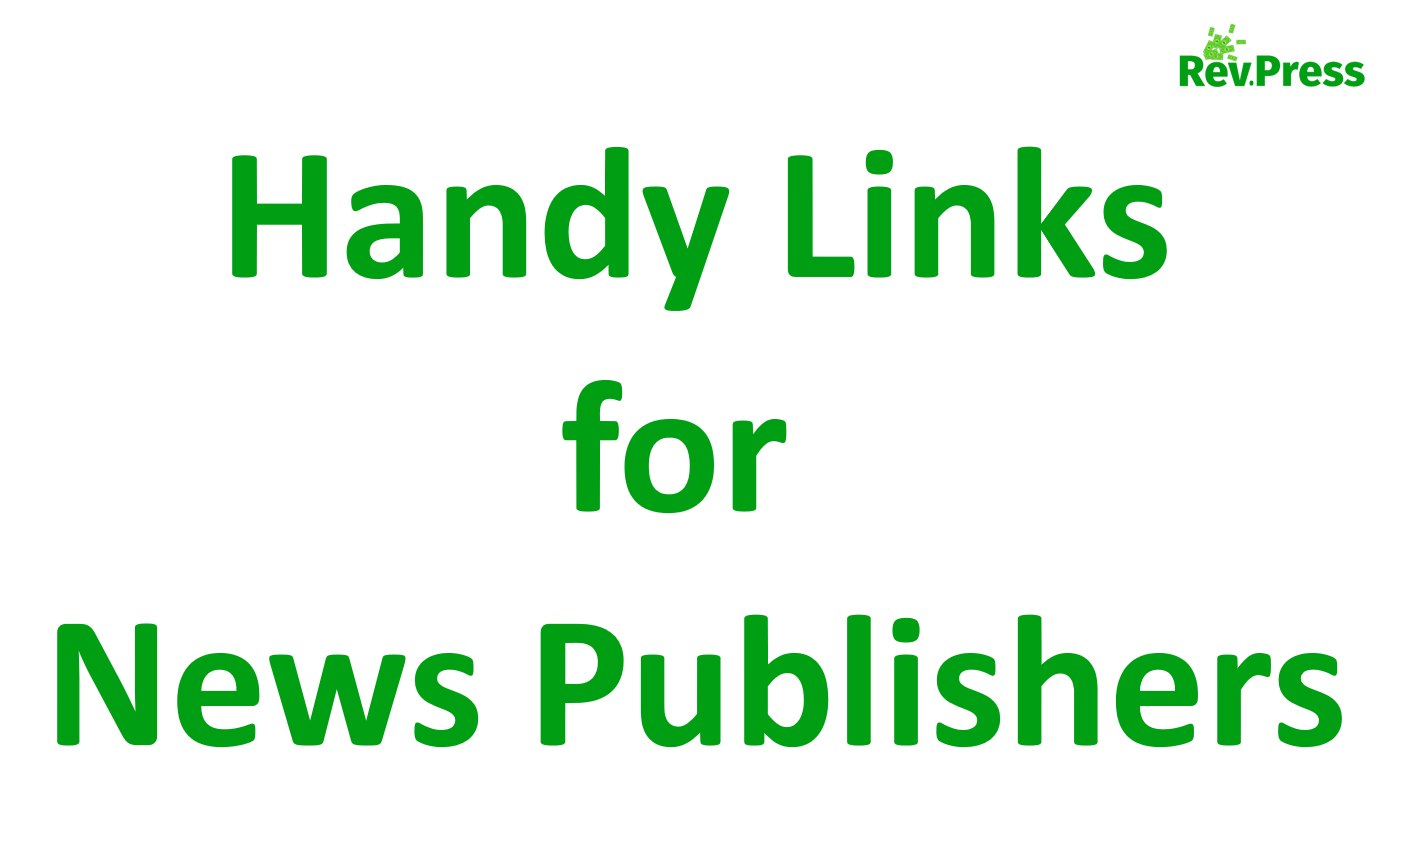 Handy links for news publishers